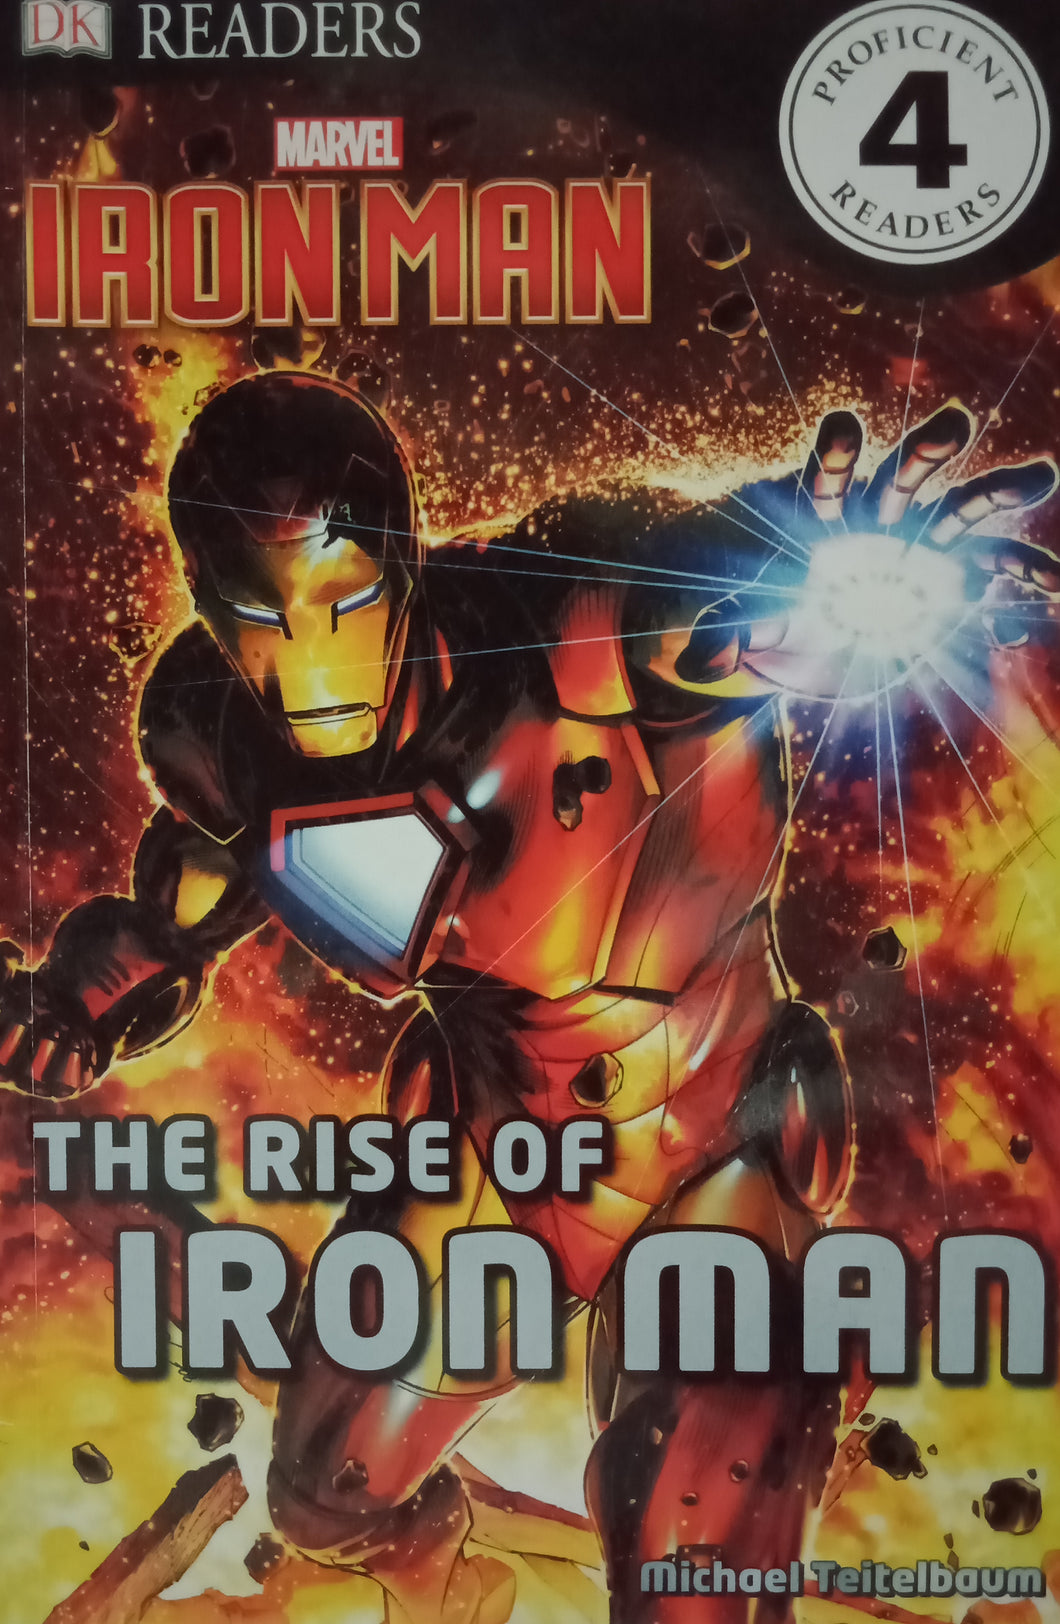 DK Readers: The Rise Of Iron Man